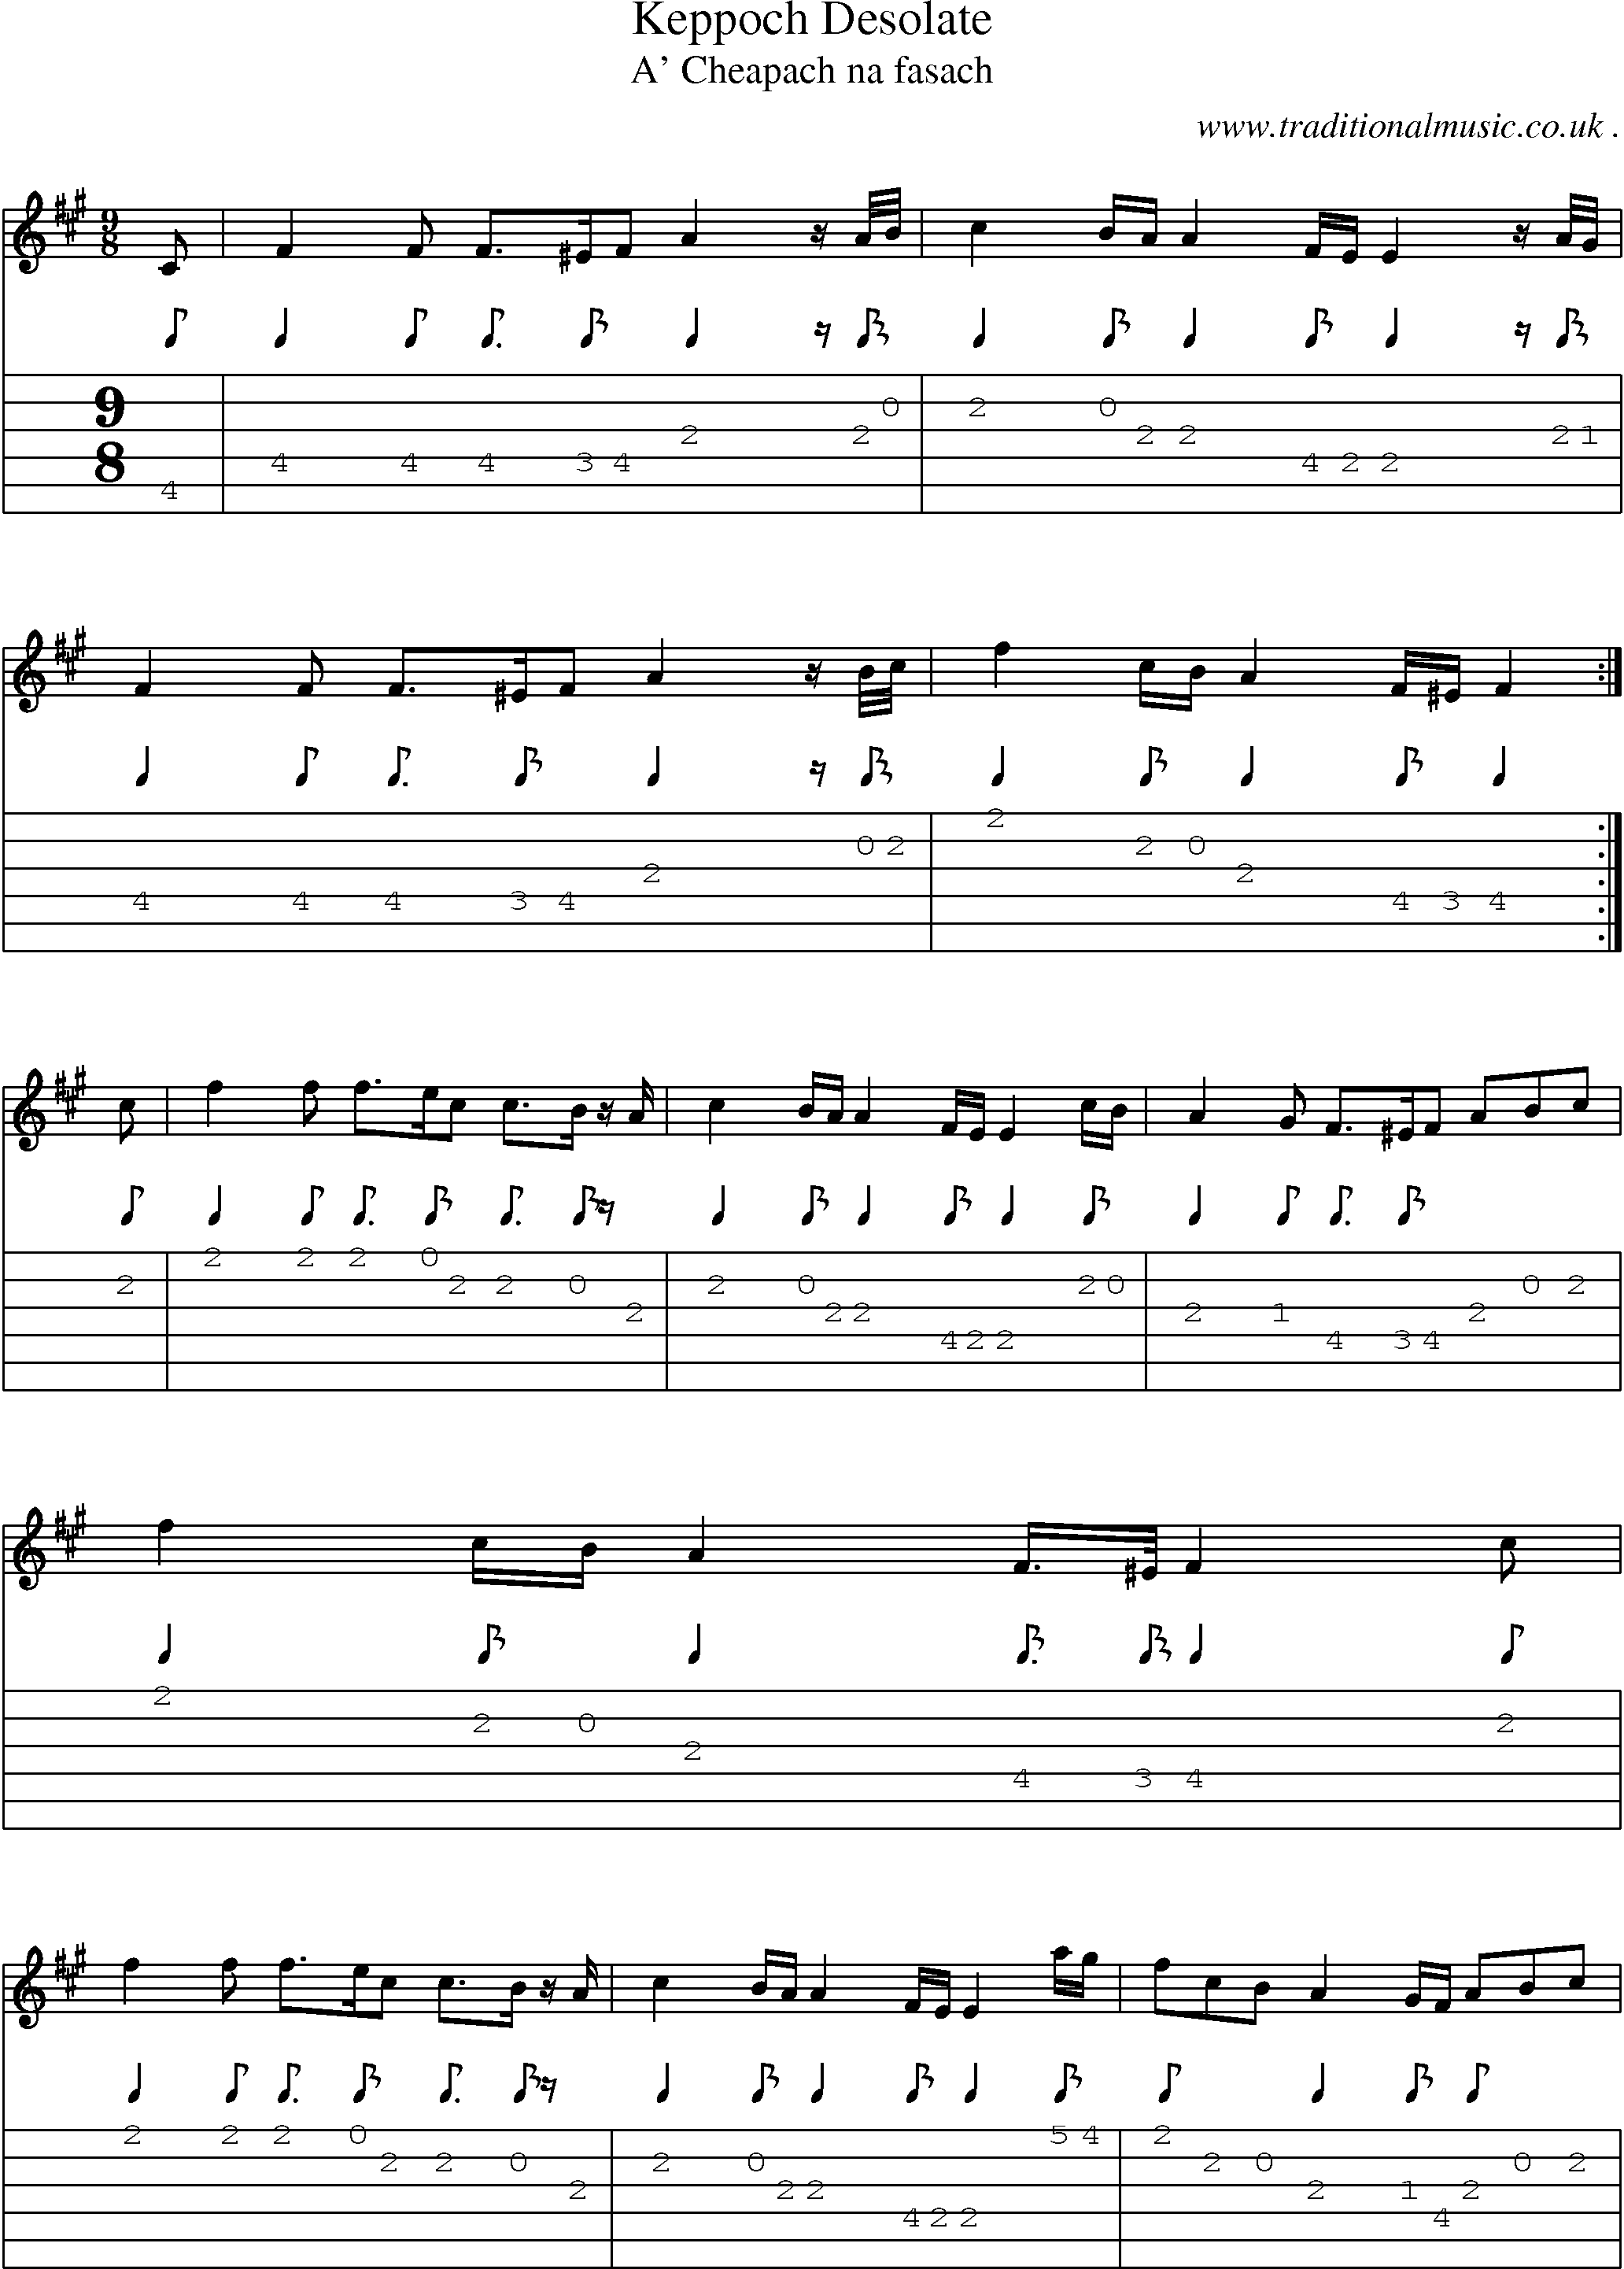 Sheet-music  score, Chords and Guitar Tabs for Keppoch Desolate